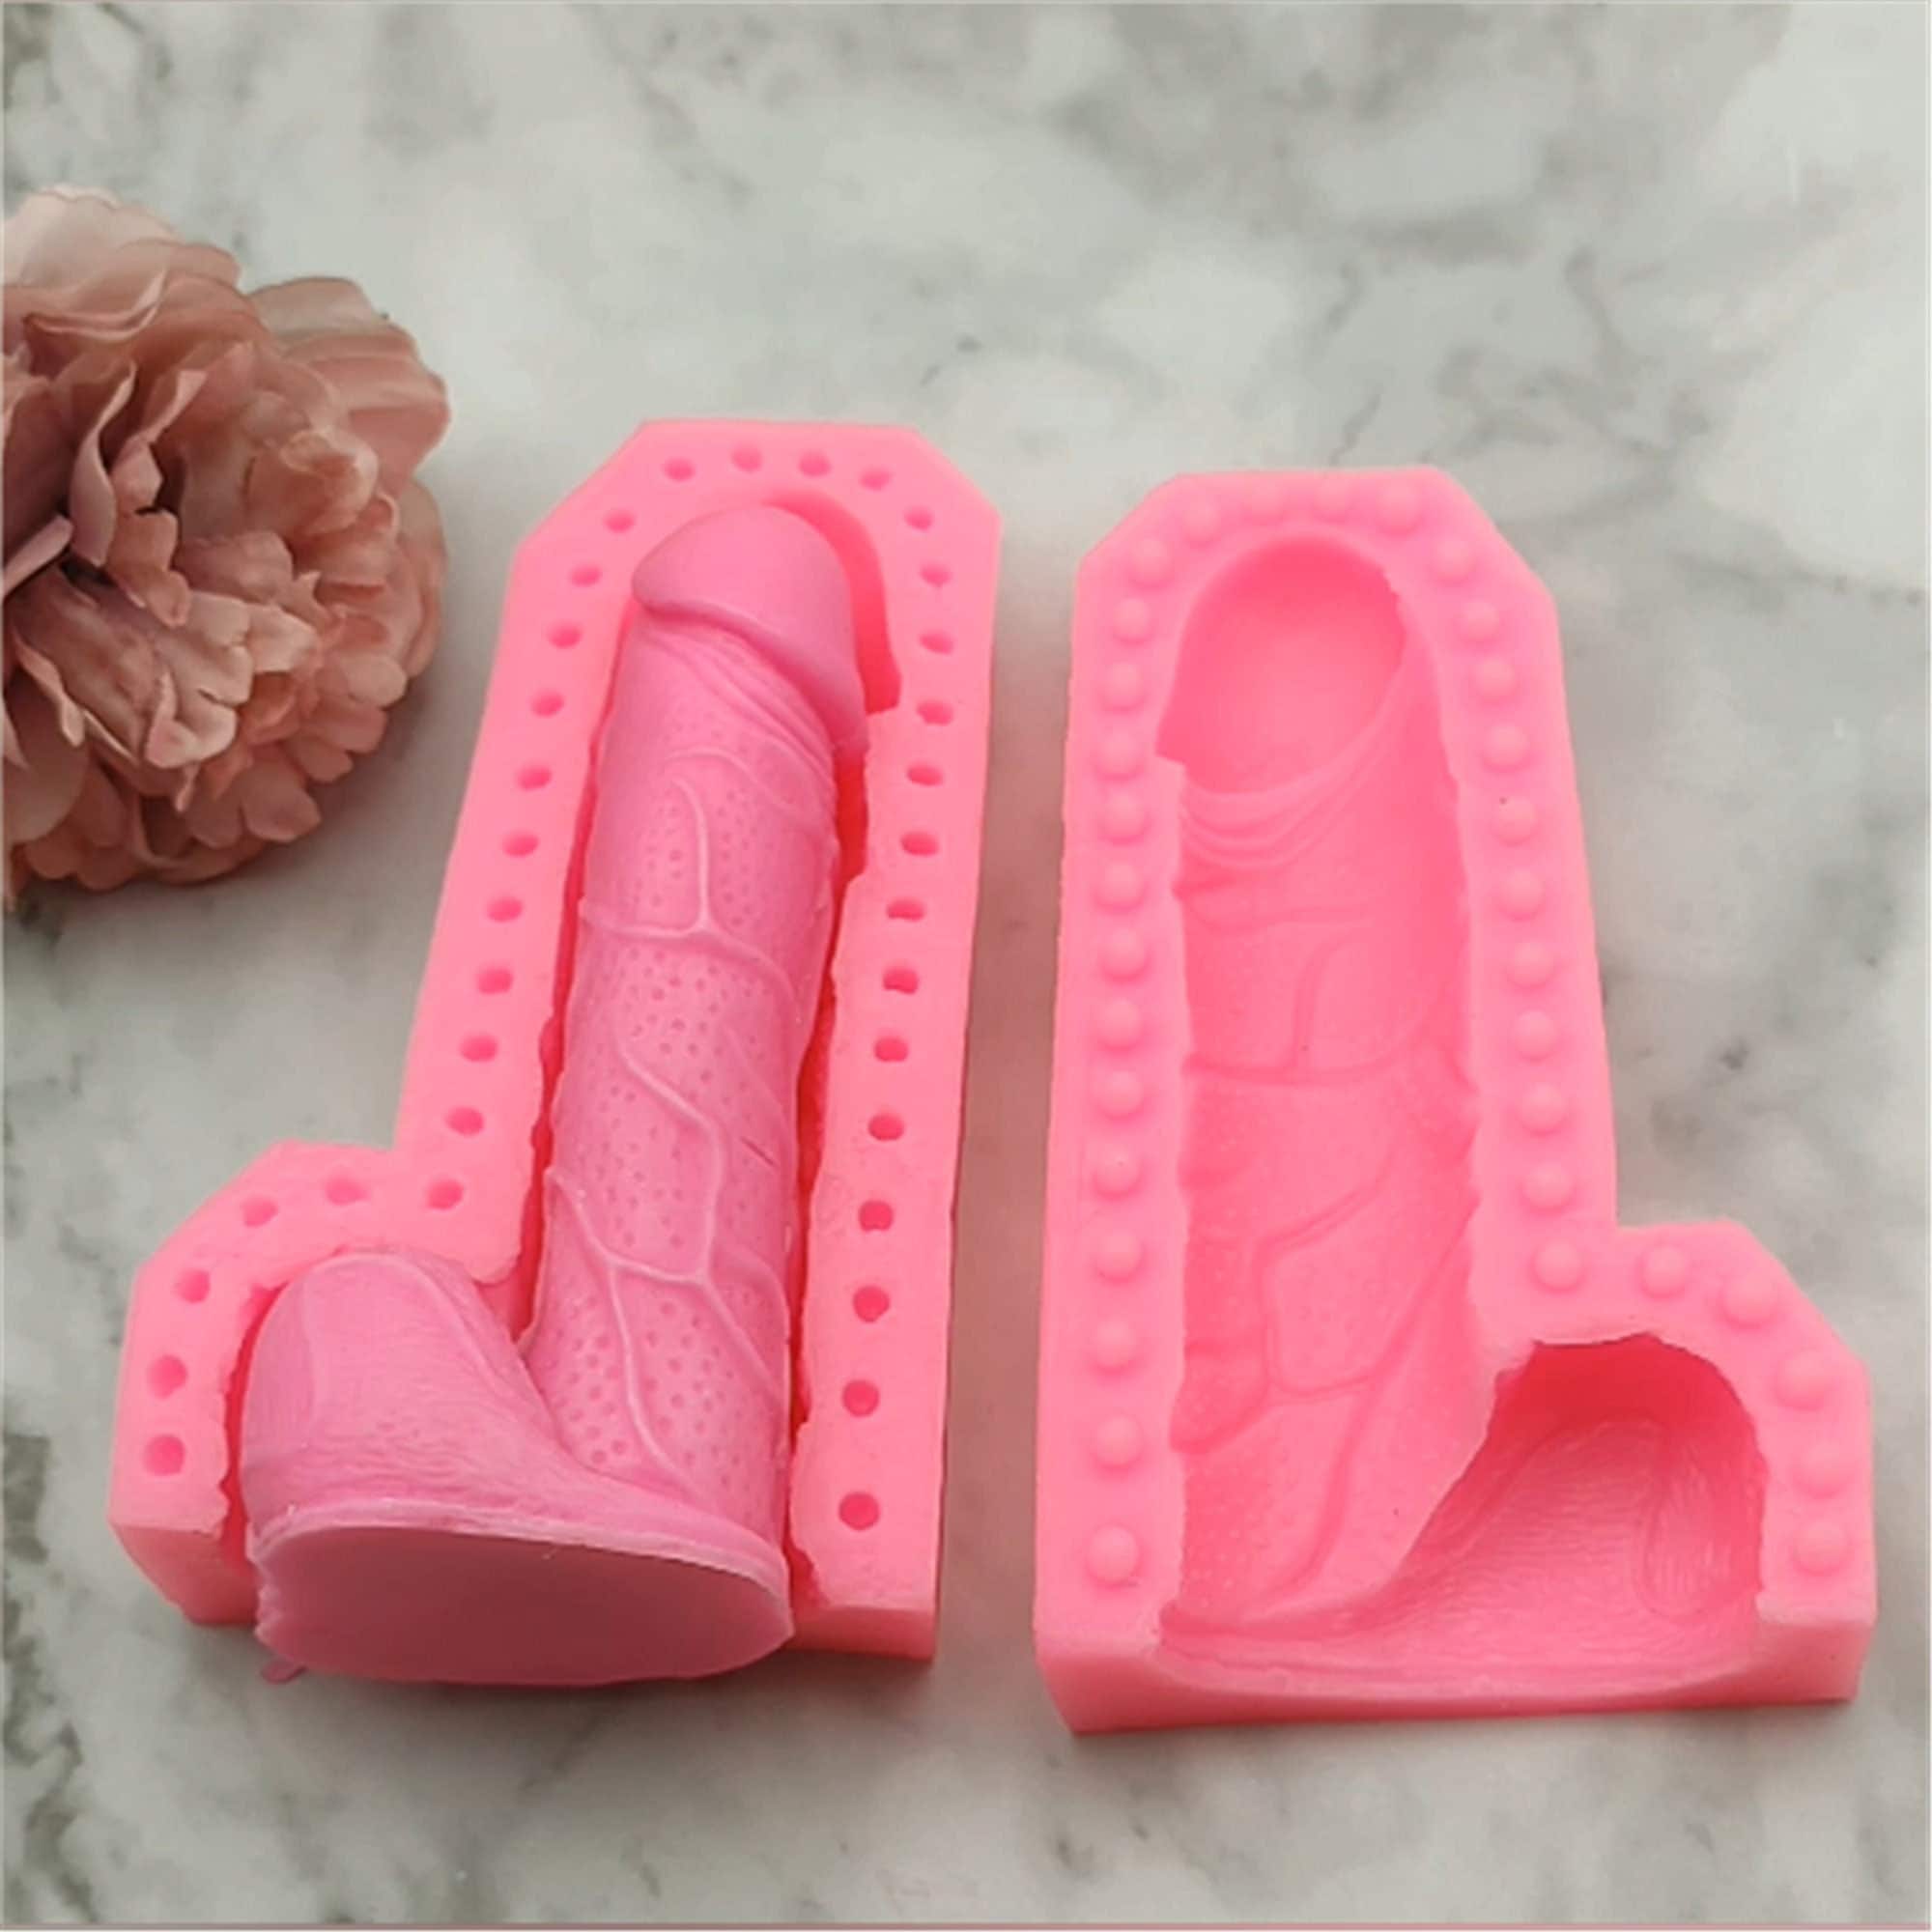 Penis Cooking Molds